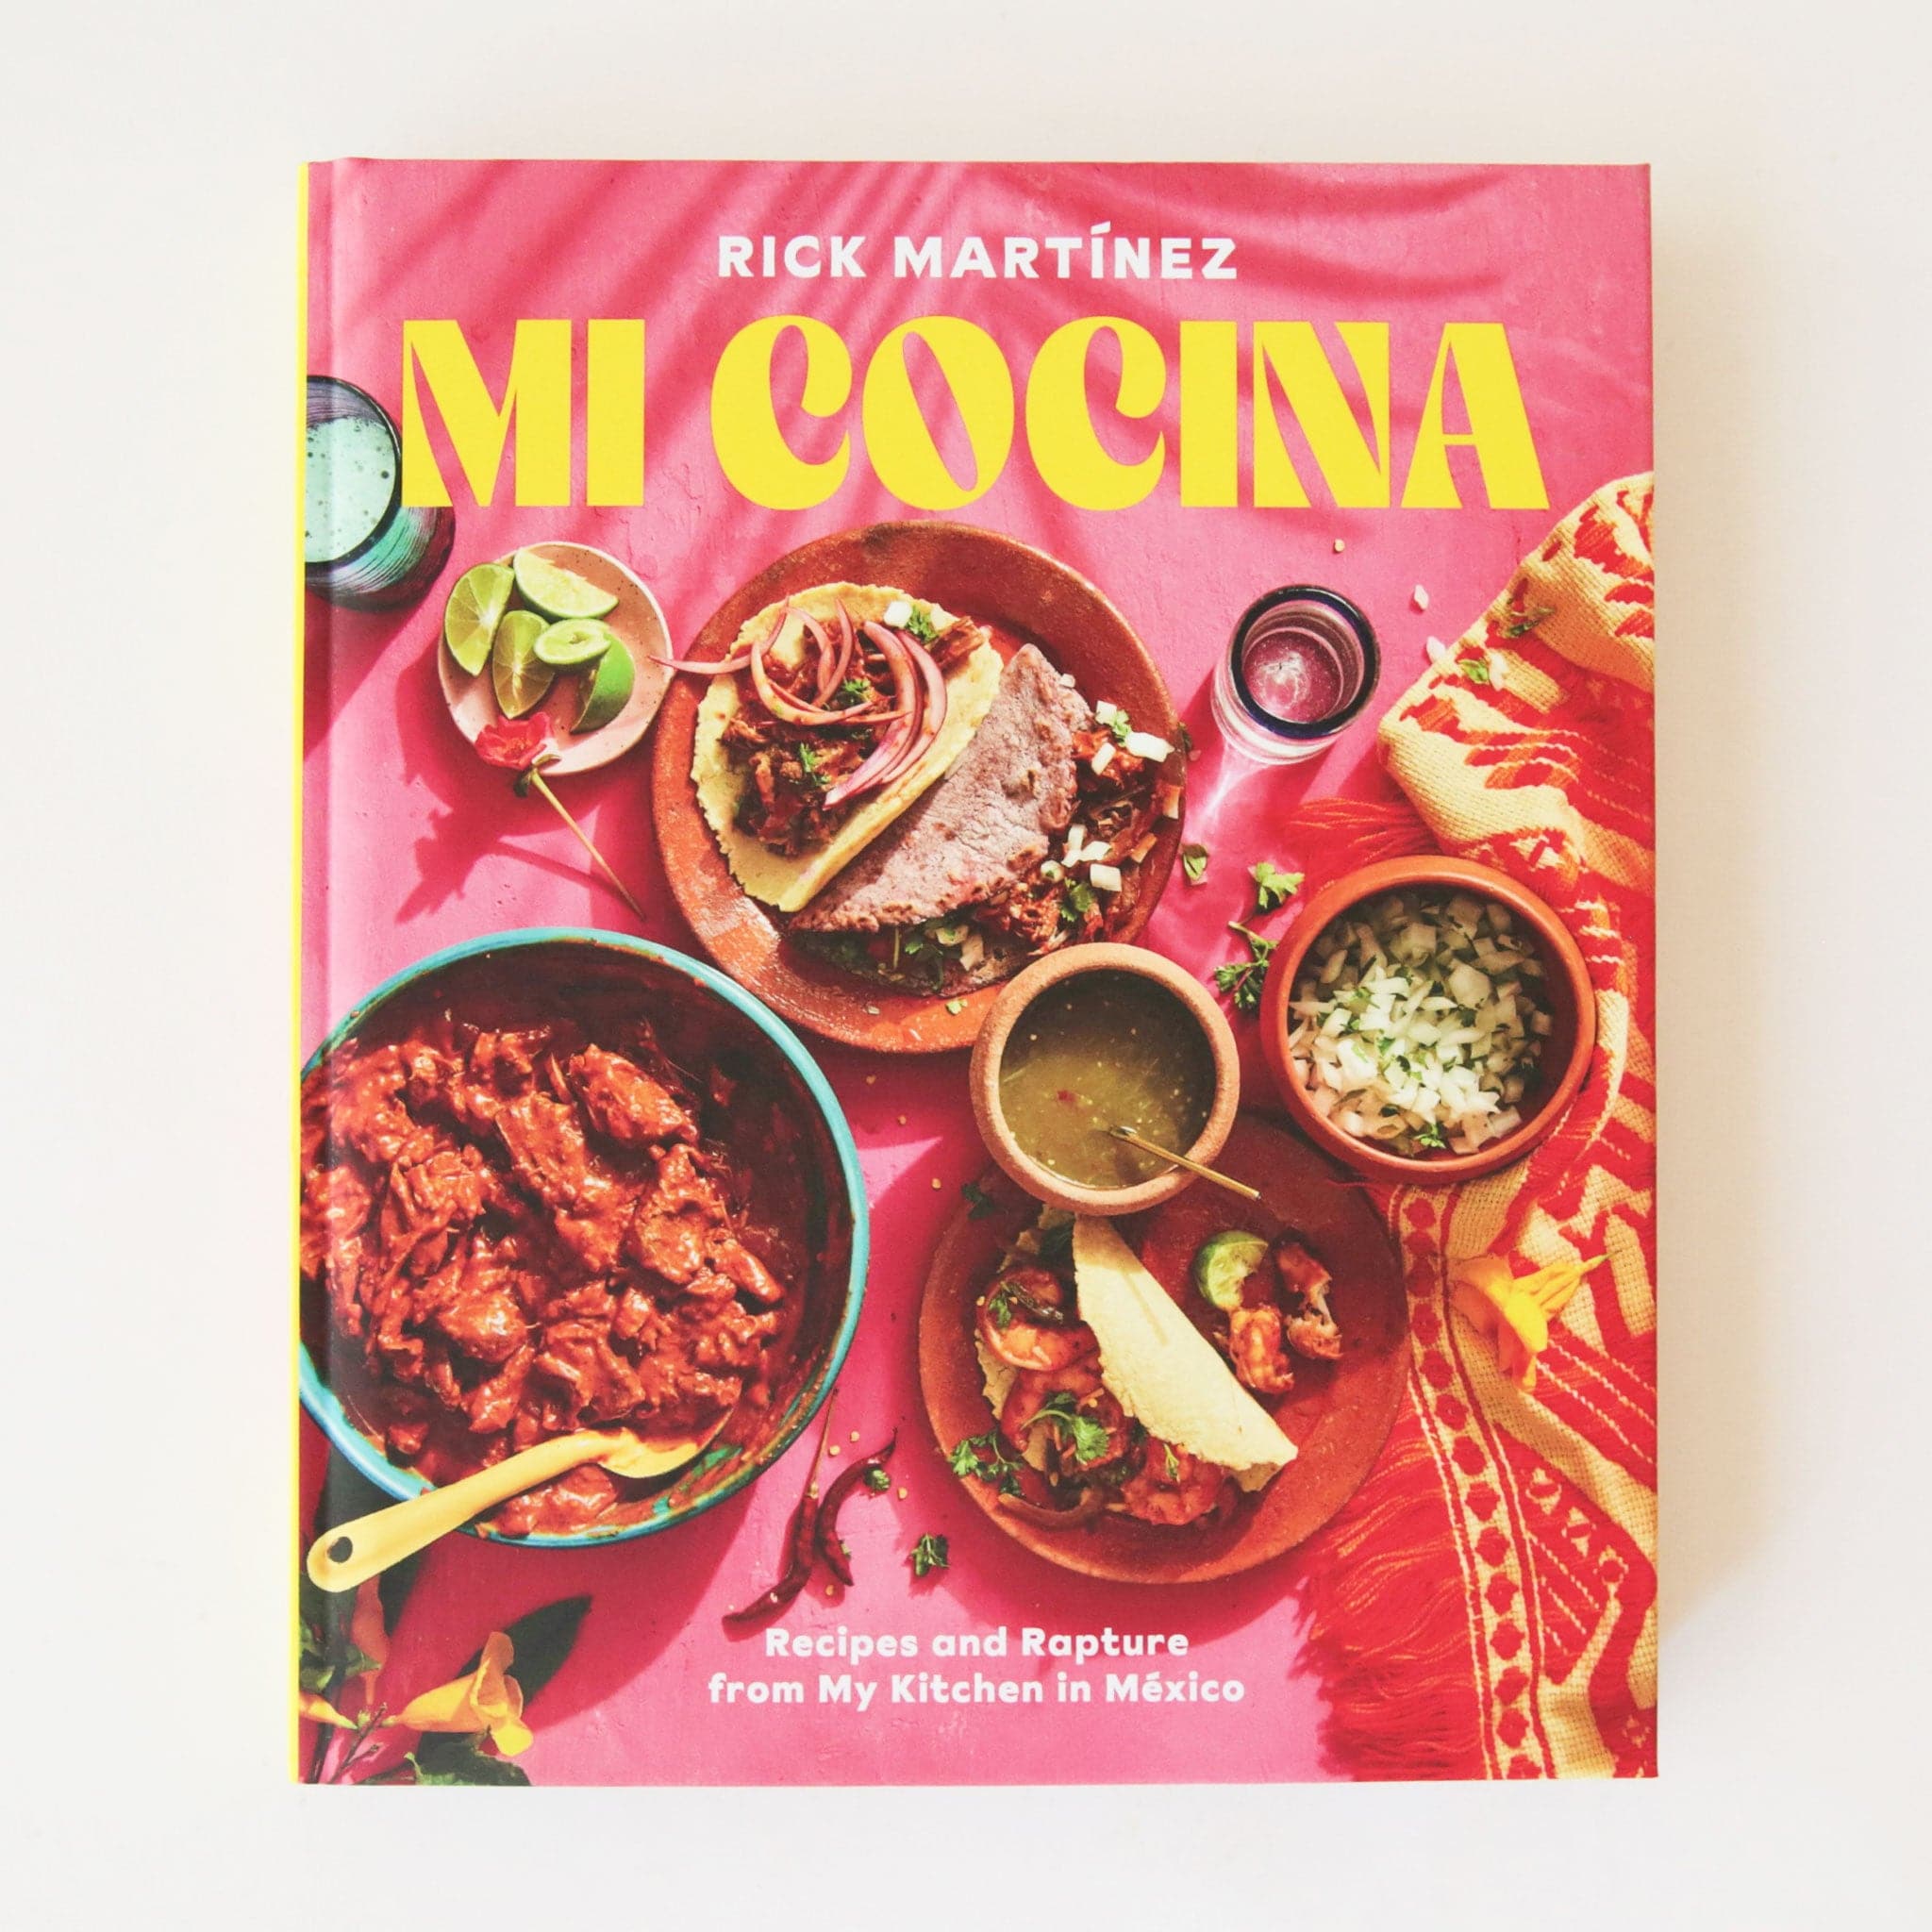 A bright pink book cover with a yellow font title that reads, "Mi Cocina" along with an assortment of Mexican cuisine.